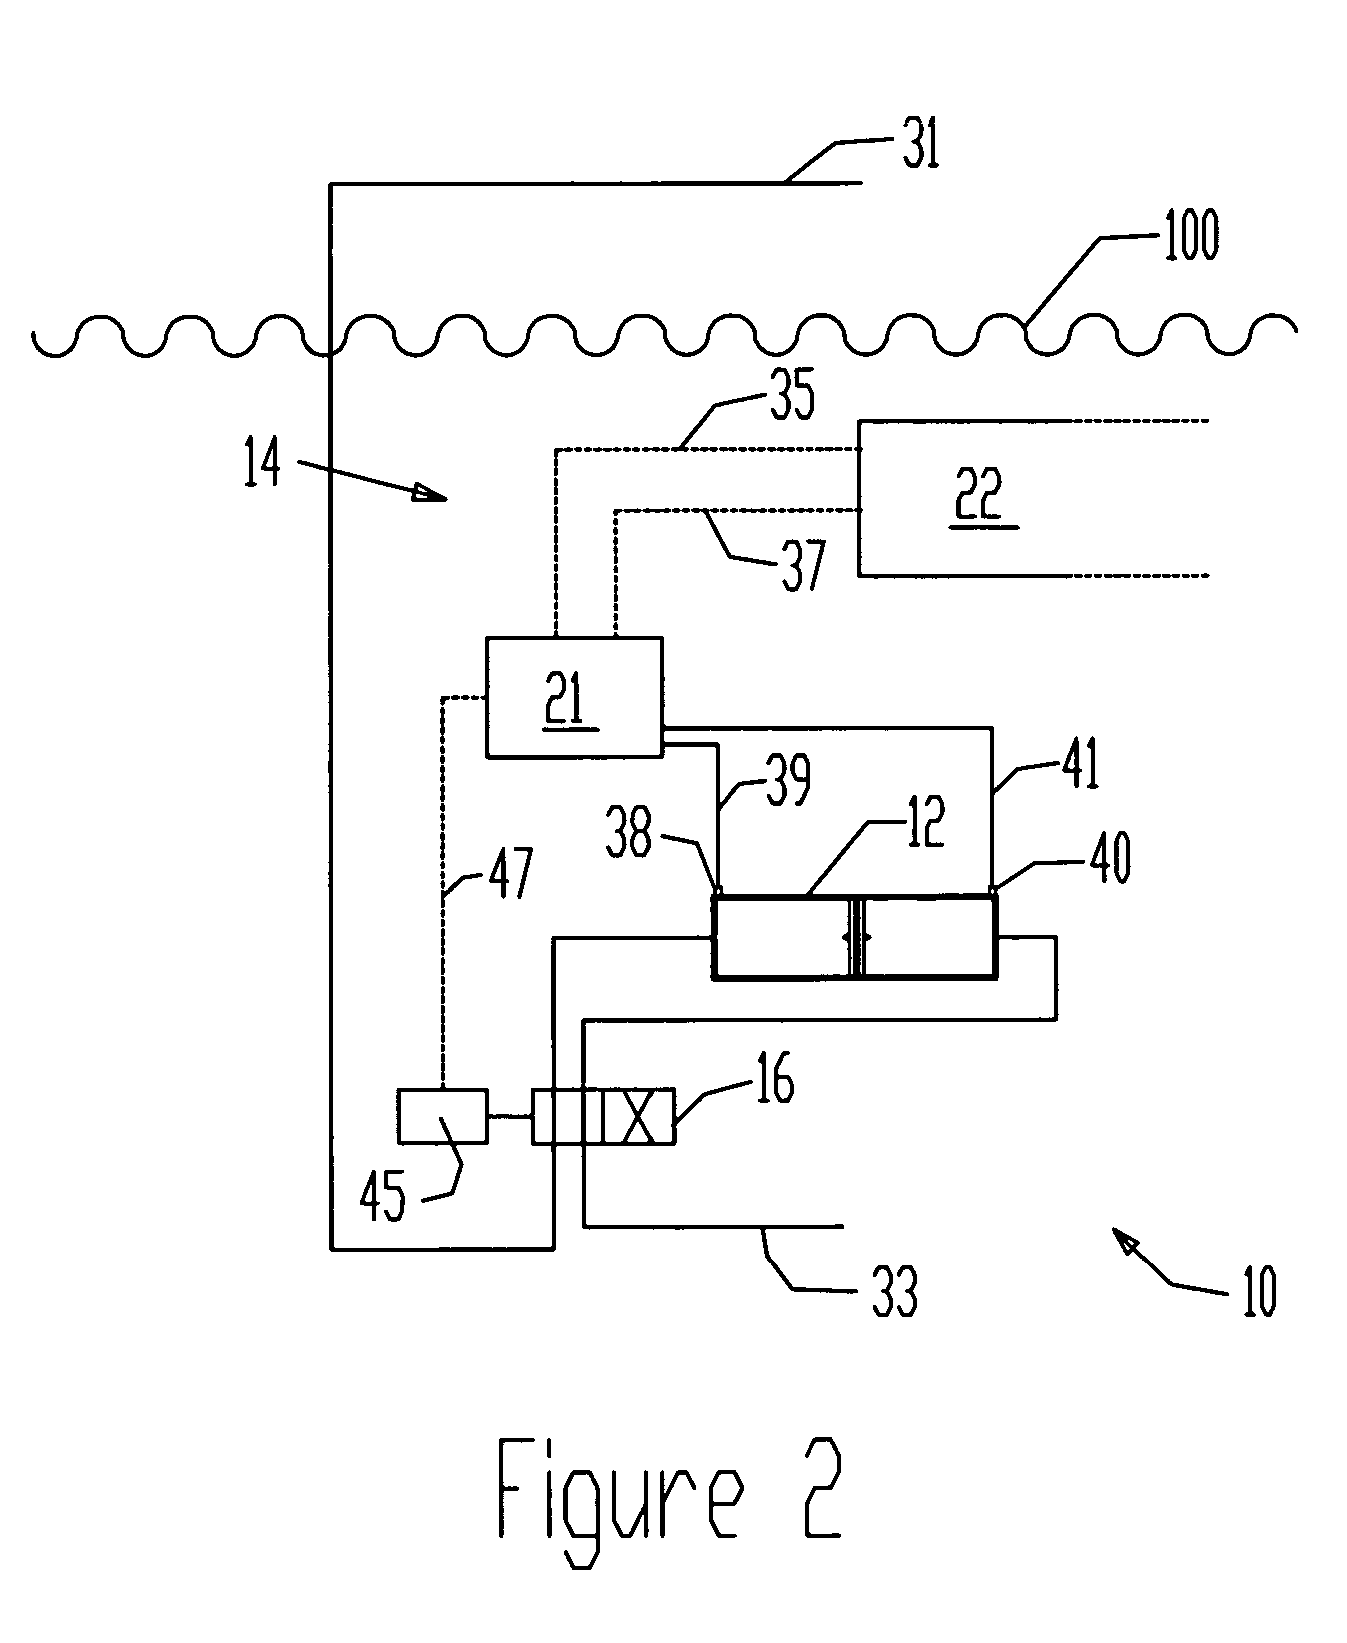 Fluid injection system